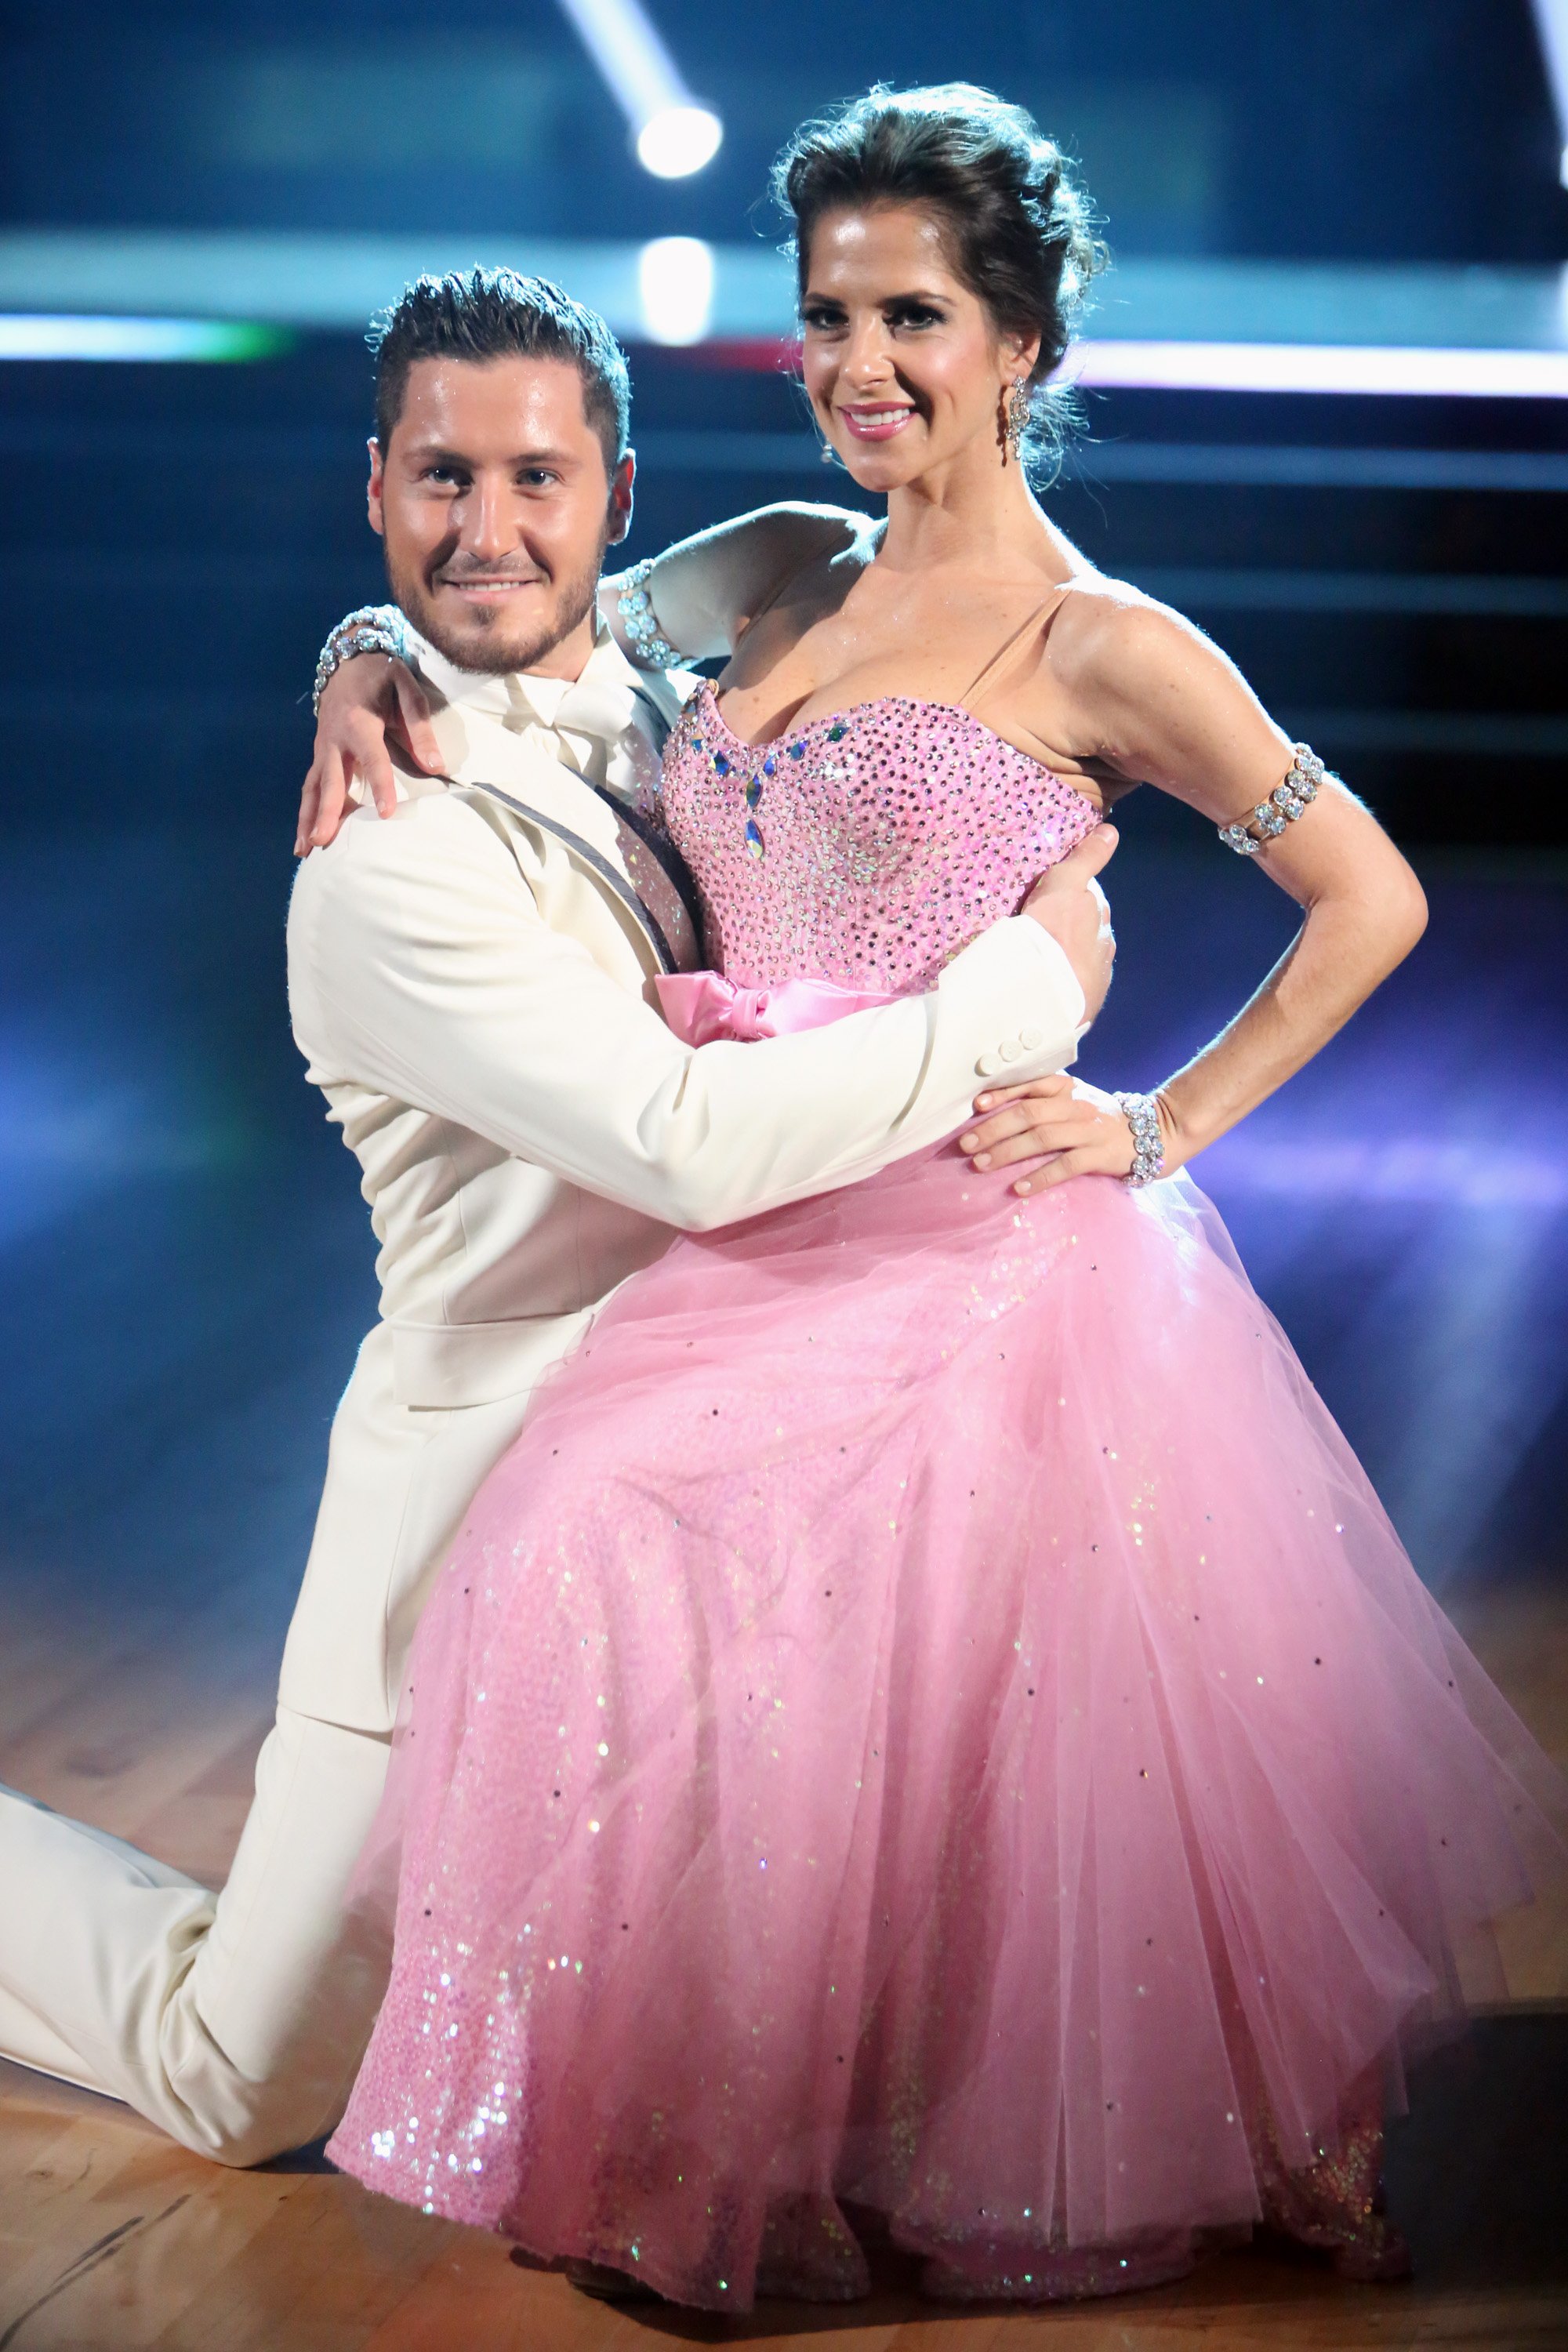 Val Chmerkovskiy and Kelly Monaco on “Dancing with the Stars” in 2012. | Source: Getty Images